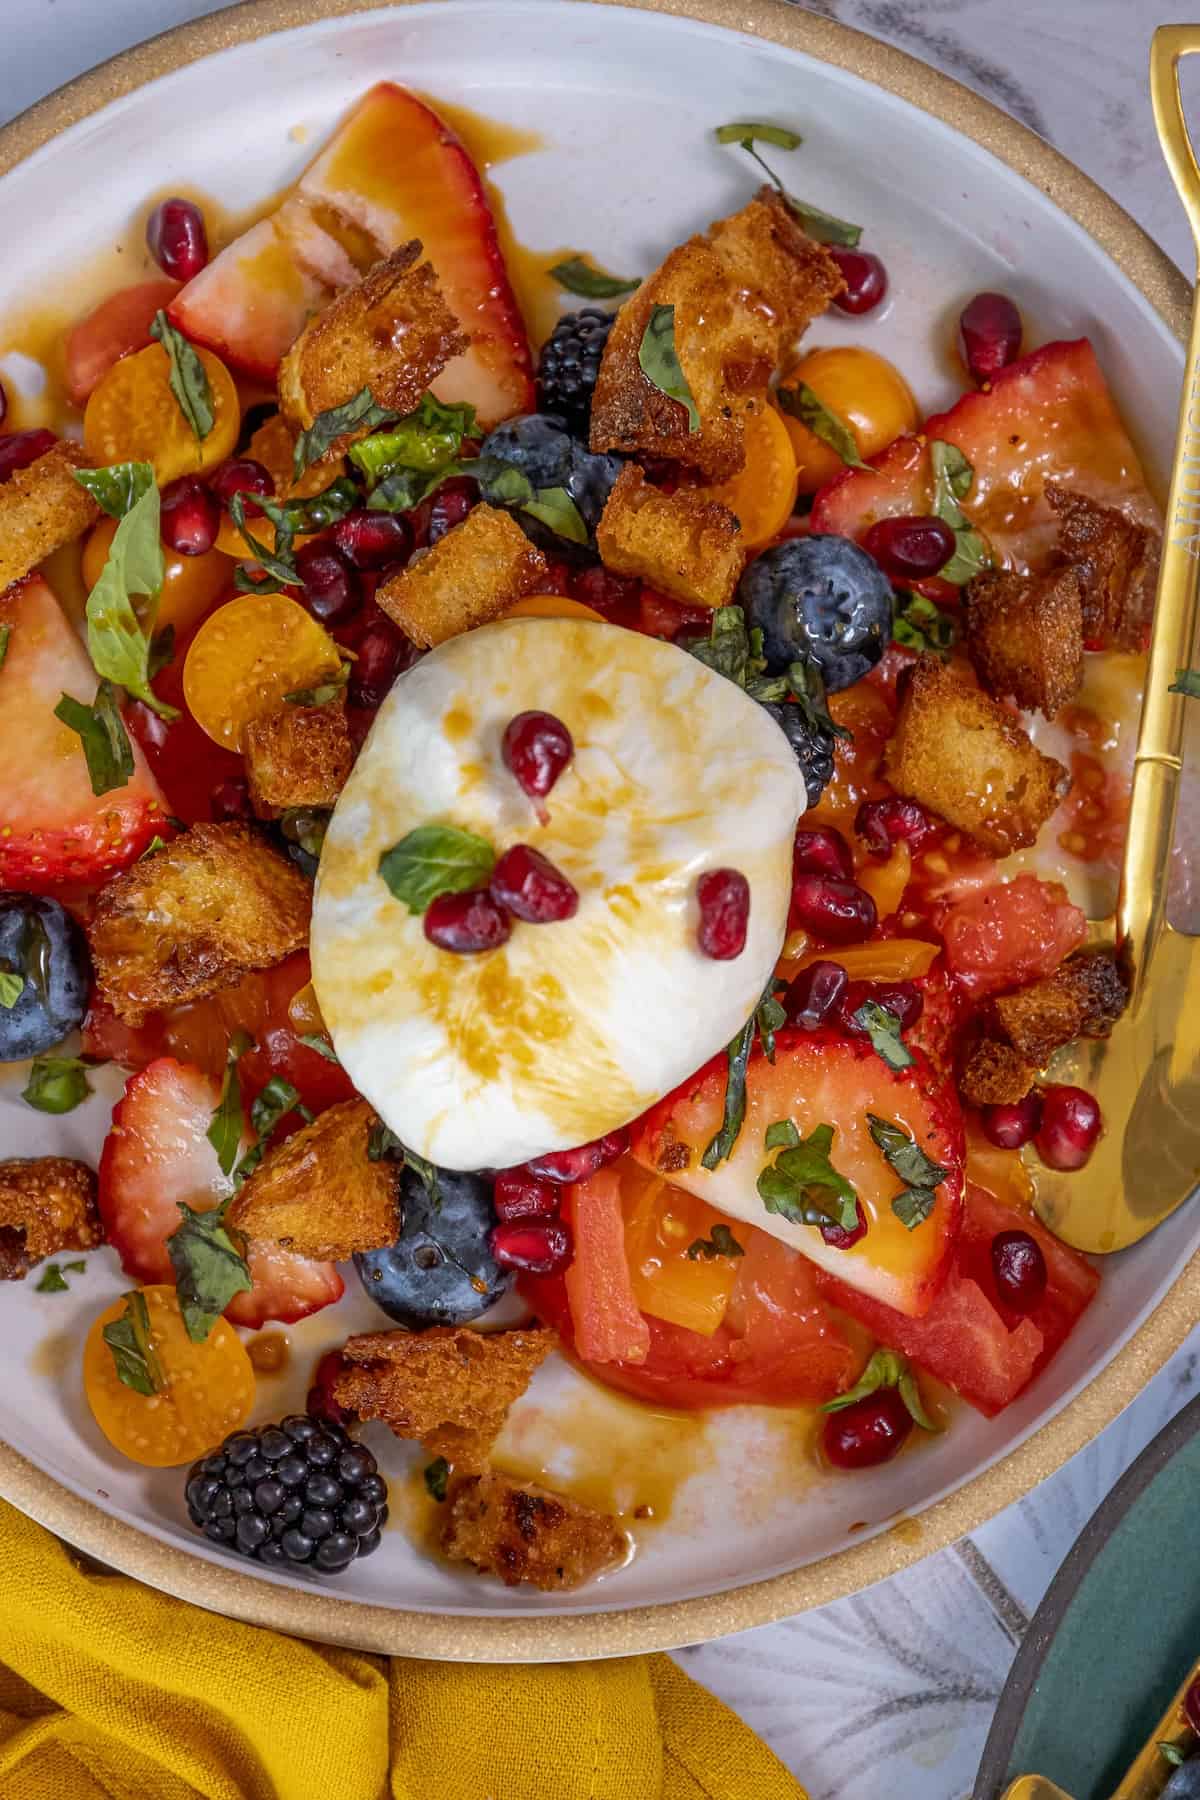 A plate of fruit salad with a poached egg on top, topped with berries.